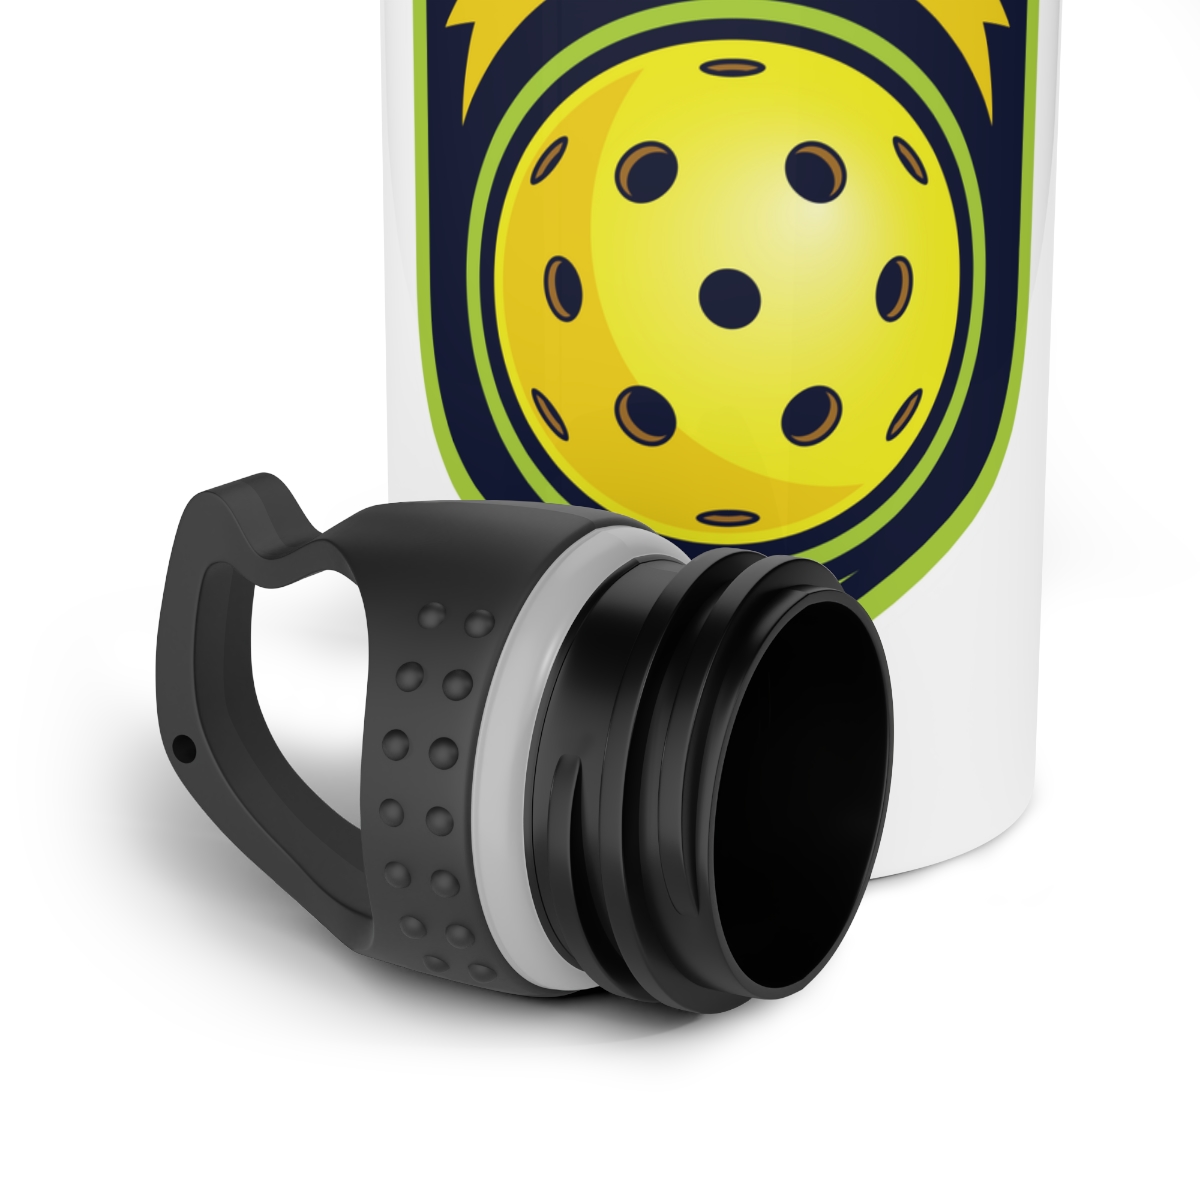 Pickleball Rookie - Crest Stainless Steel Water Bottle product thumbnail image